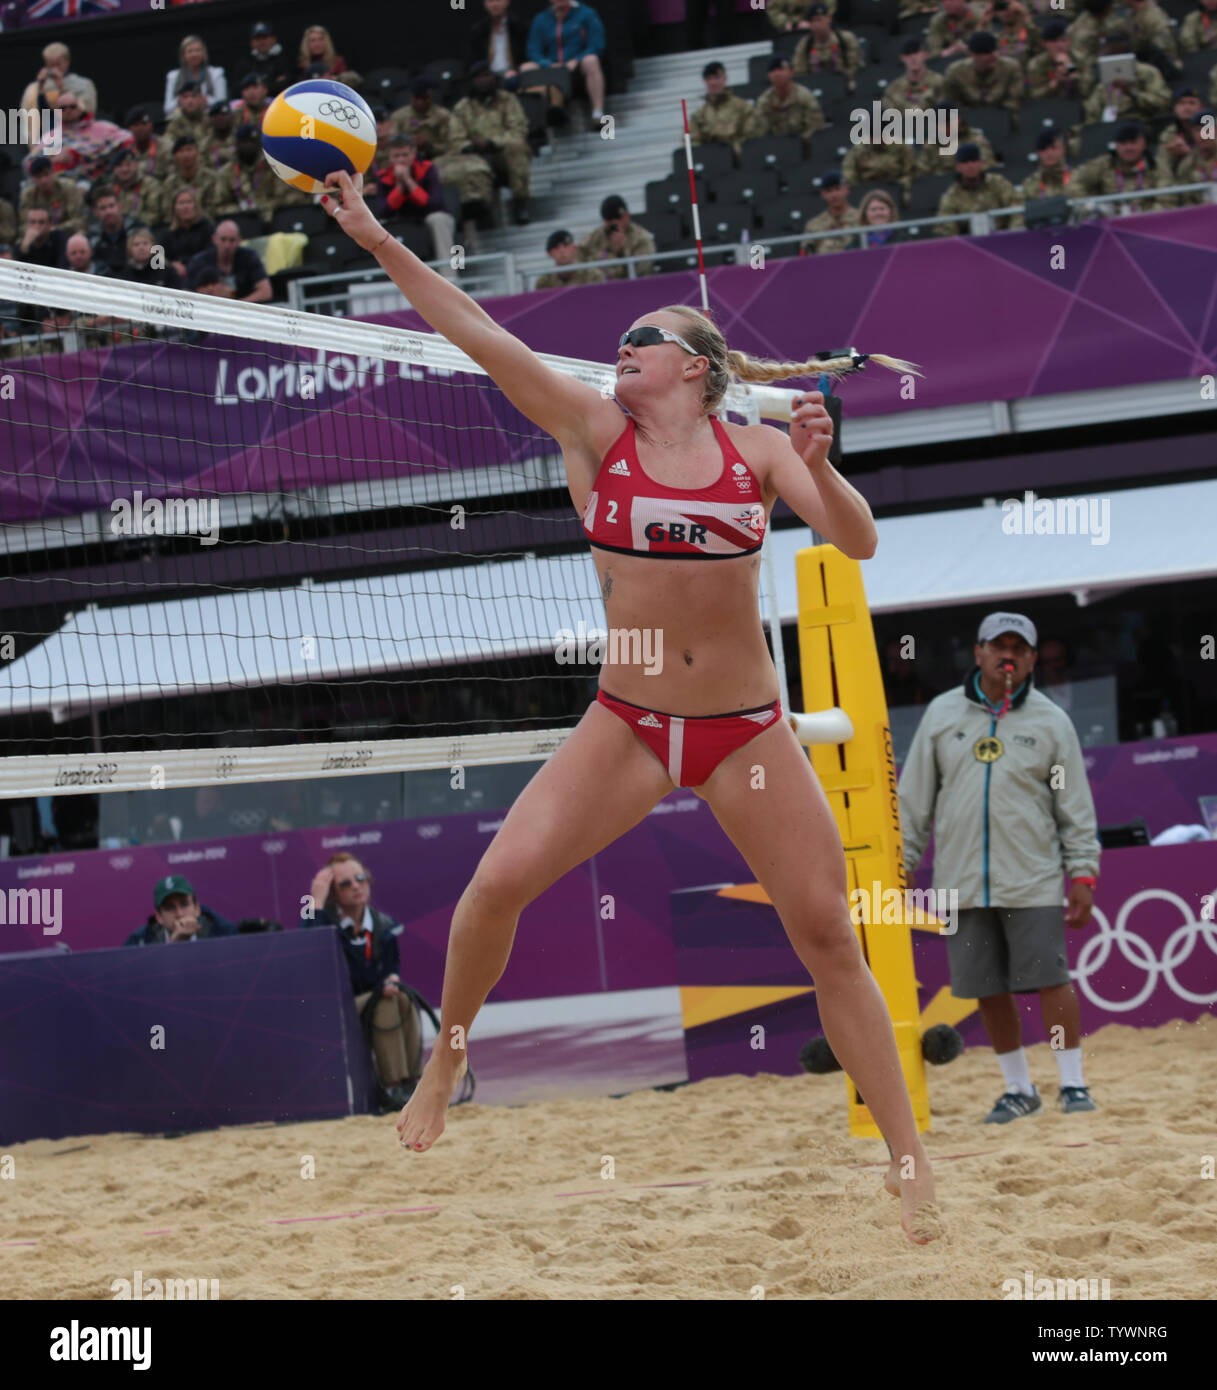 Great Britain's Zara Dampney tips the ball over the net in the Women's Beach Volleyball match against Canada at the London 2012 Summer Olympics on July 29, 2012 in London.      UPI/Hugo Philpott Stock Photo